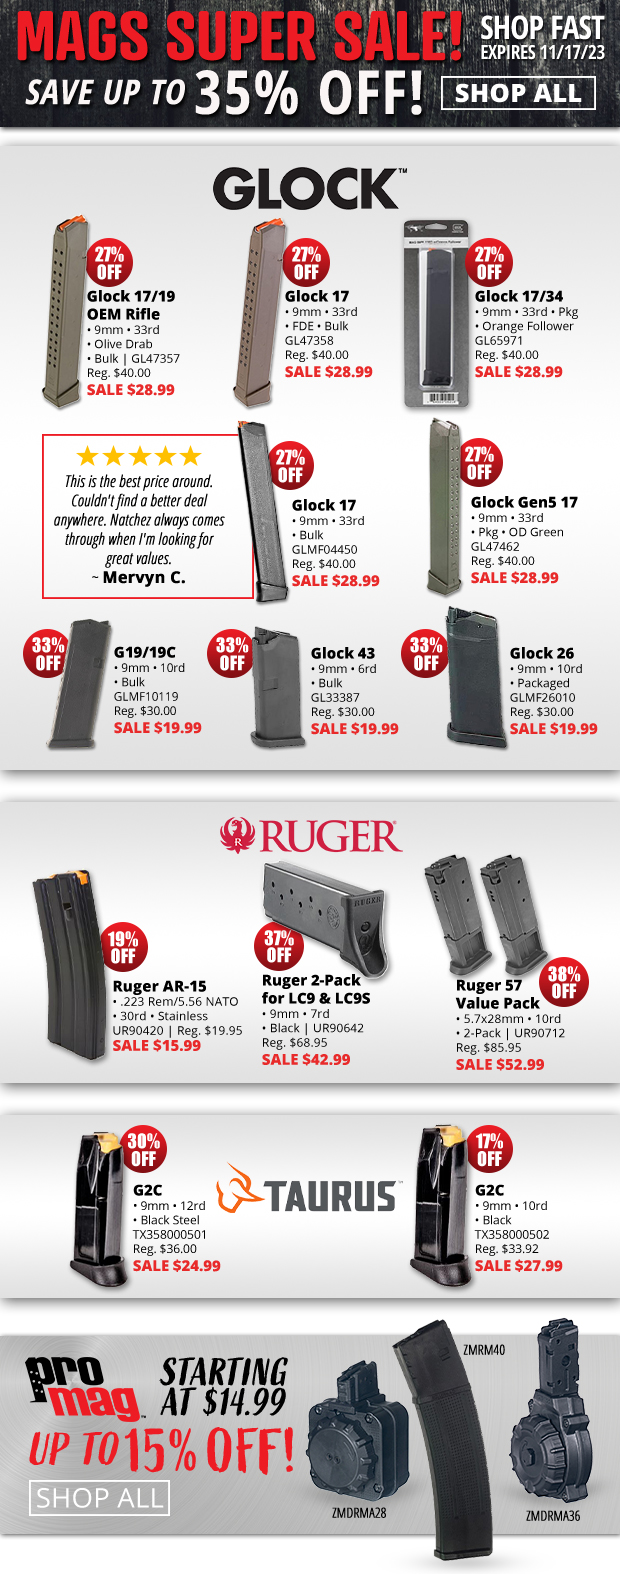 Up to 35% Off with the Mags Super Sale